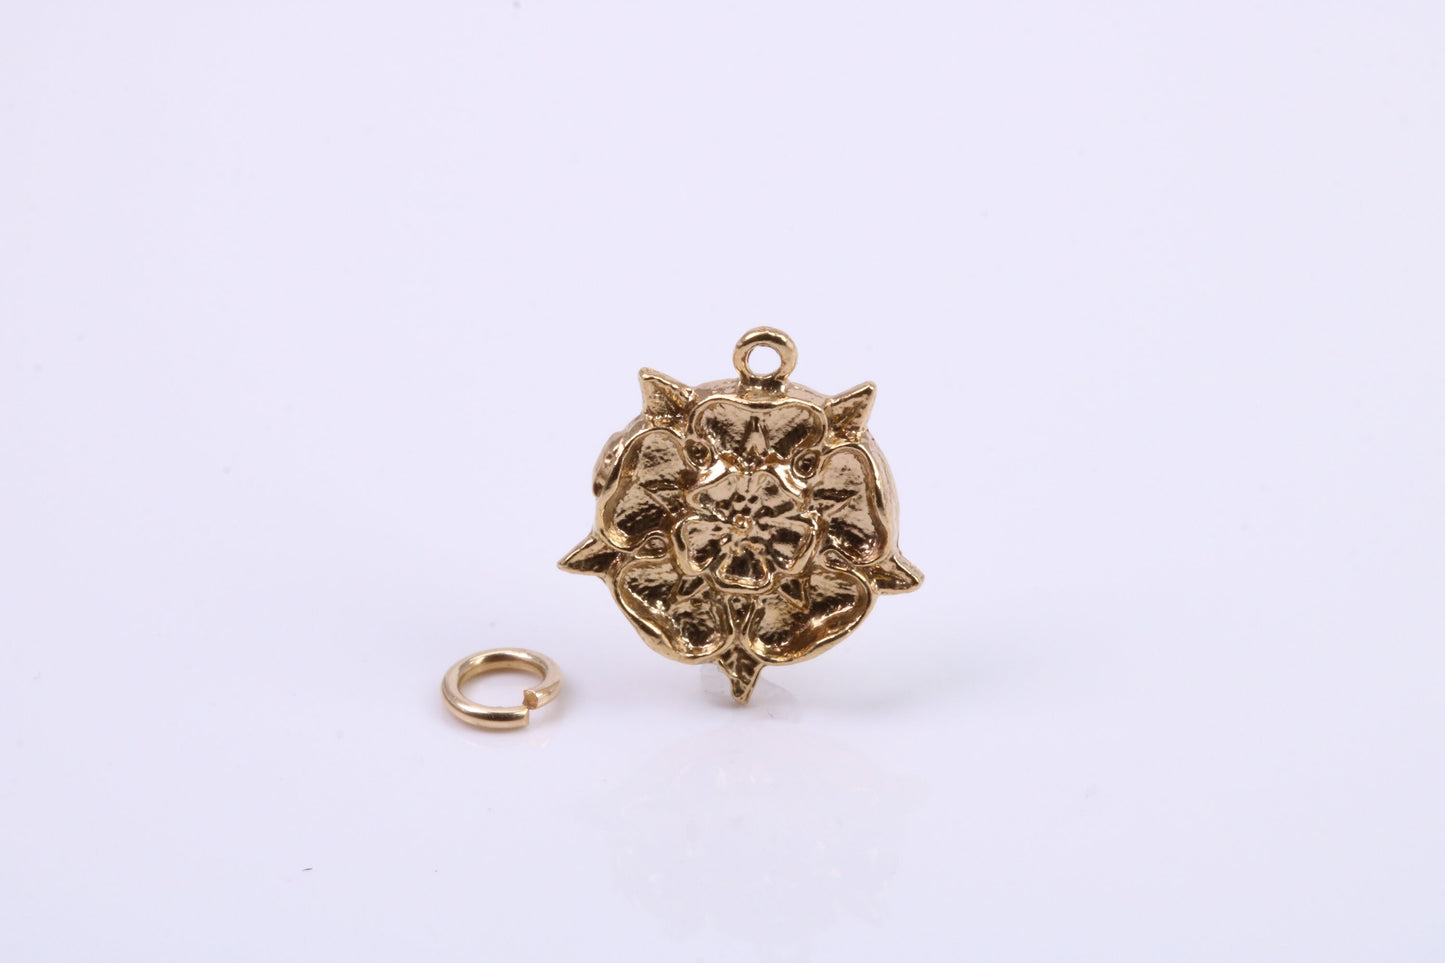 Tudor Rose Charm, Traditional Charm, Made from Solid 9ct Yellow Gold, British Hallmarked, Complete with Attachment Link